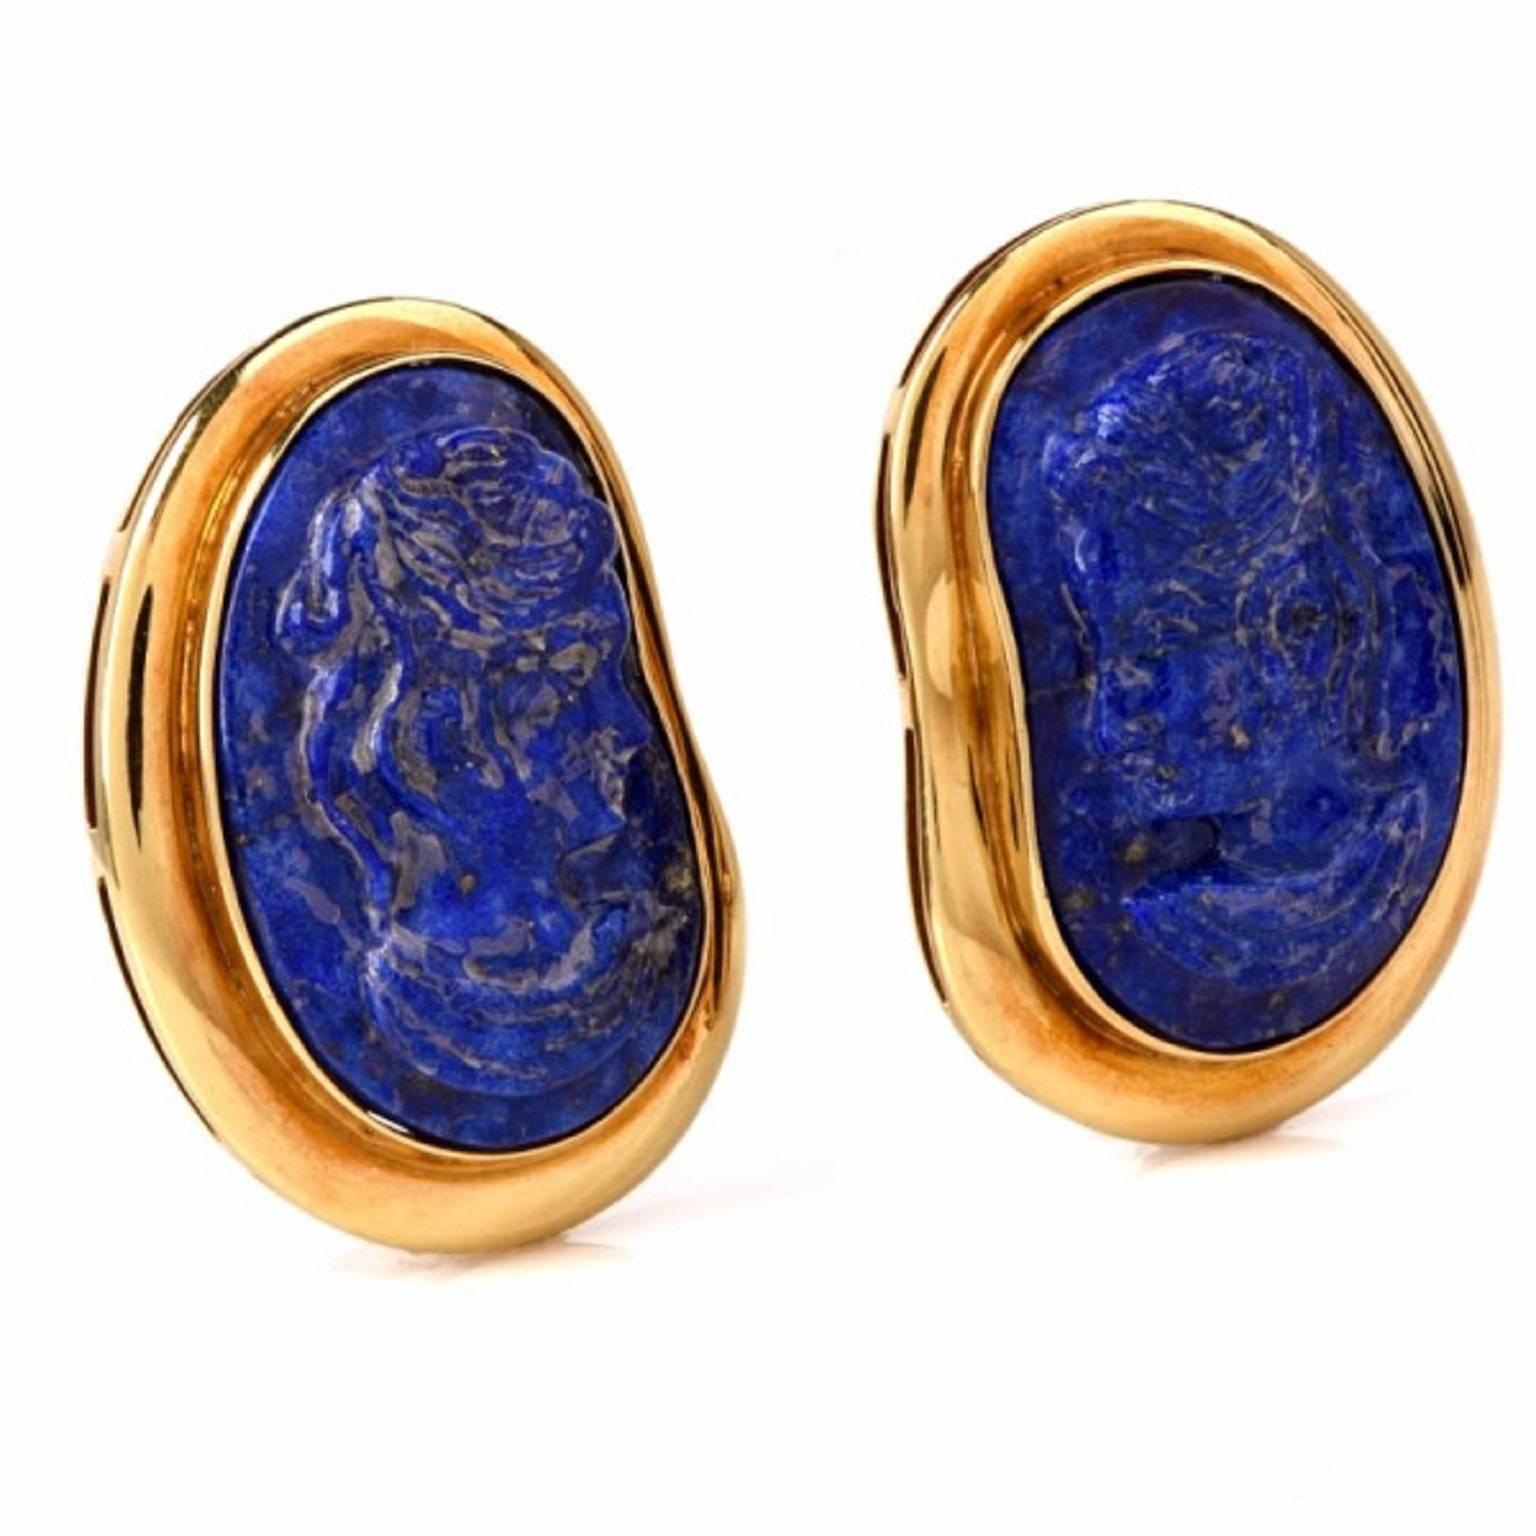 These estate earrings with genuine lapis lazuli cameo portraits are crafted in solid 18K yellow gold, weigh 36.3  grams and measure 1.75